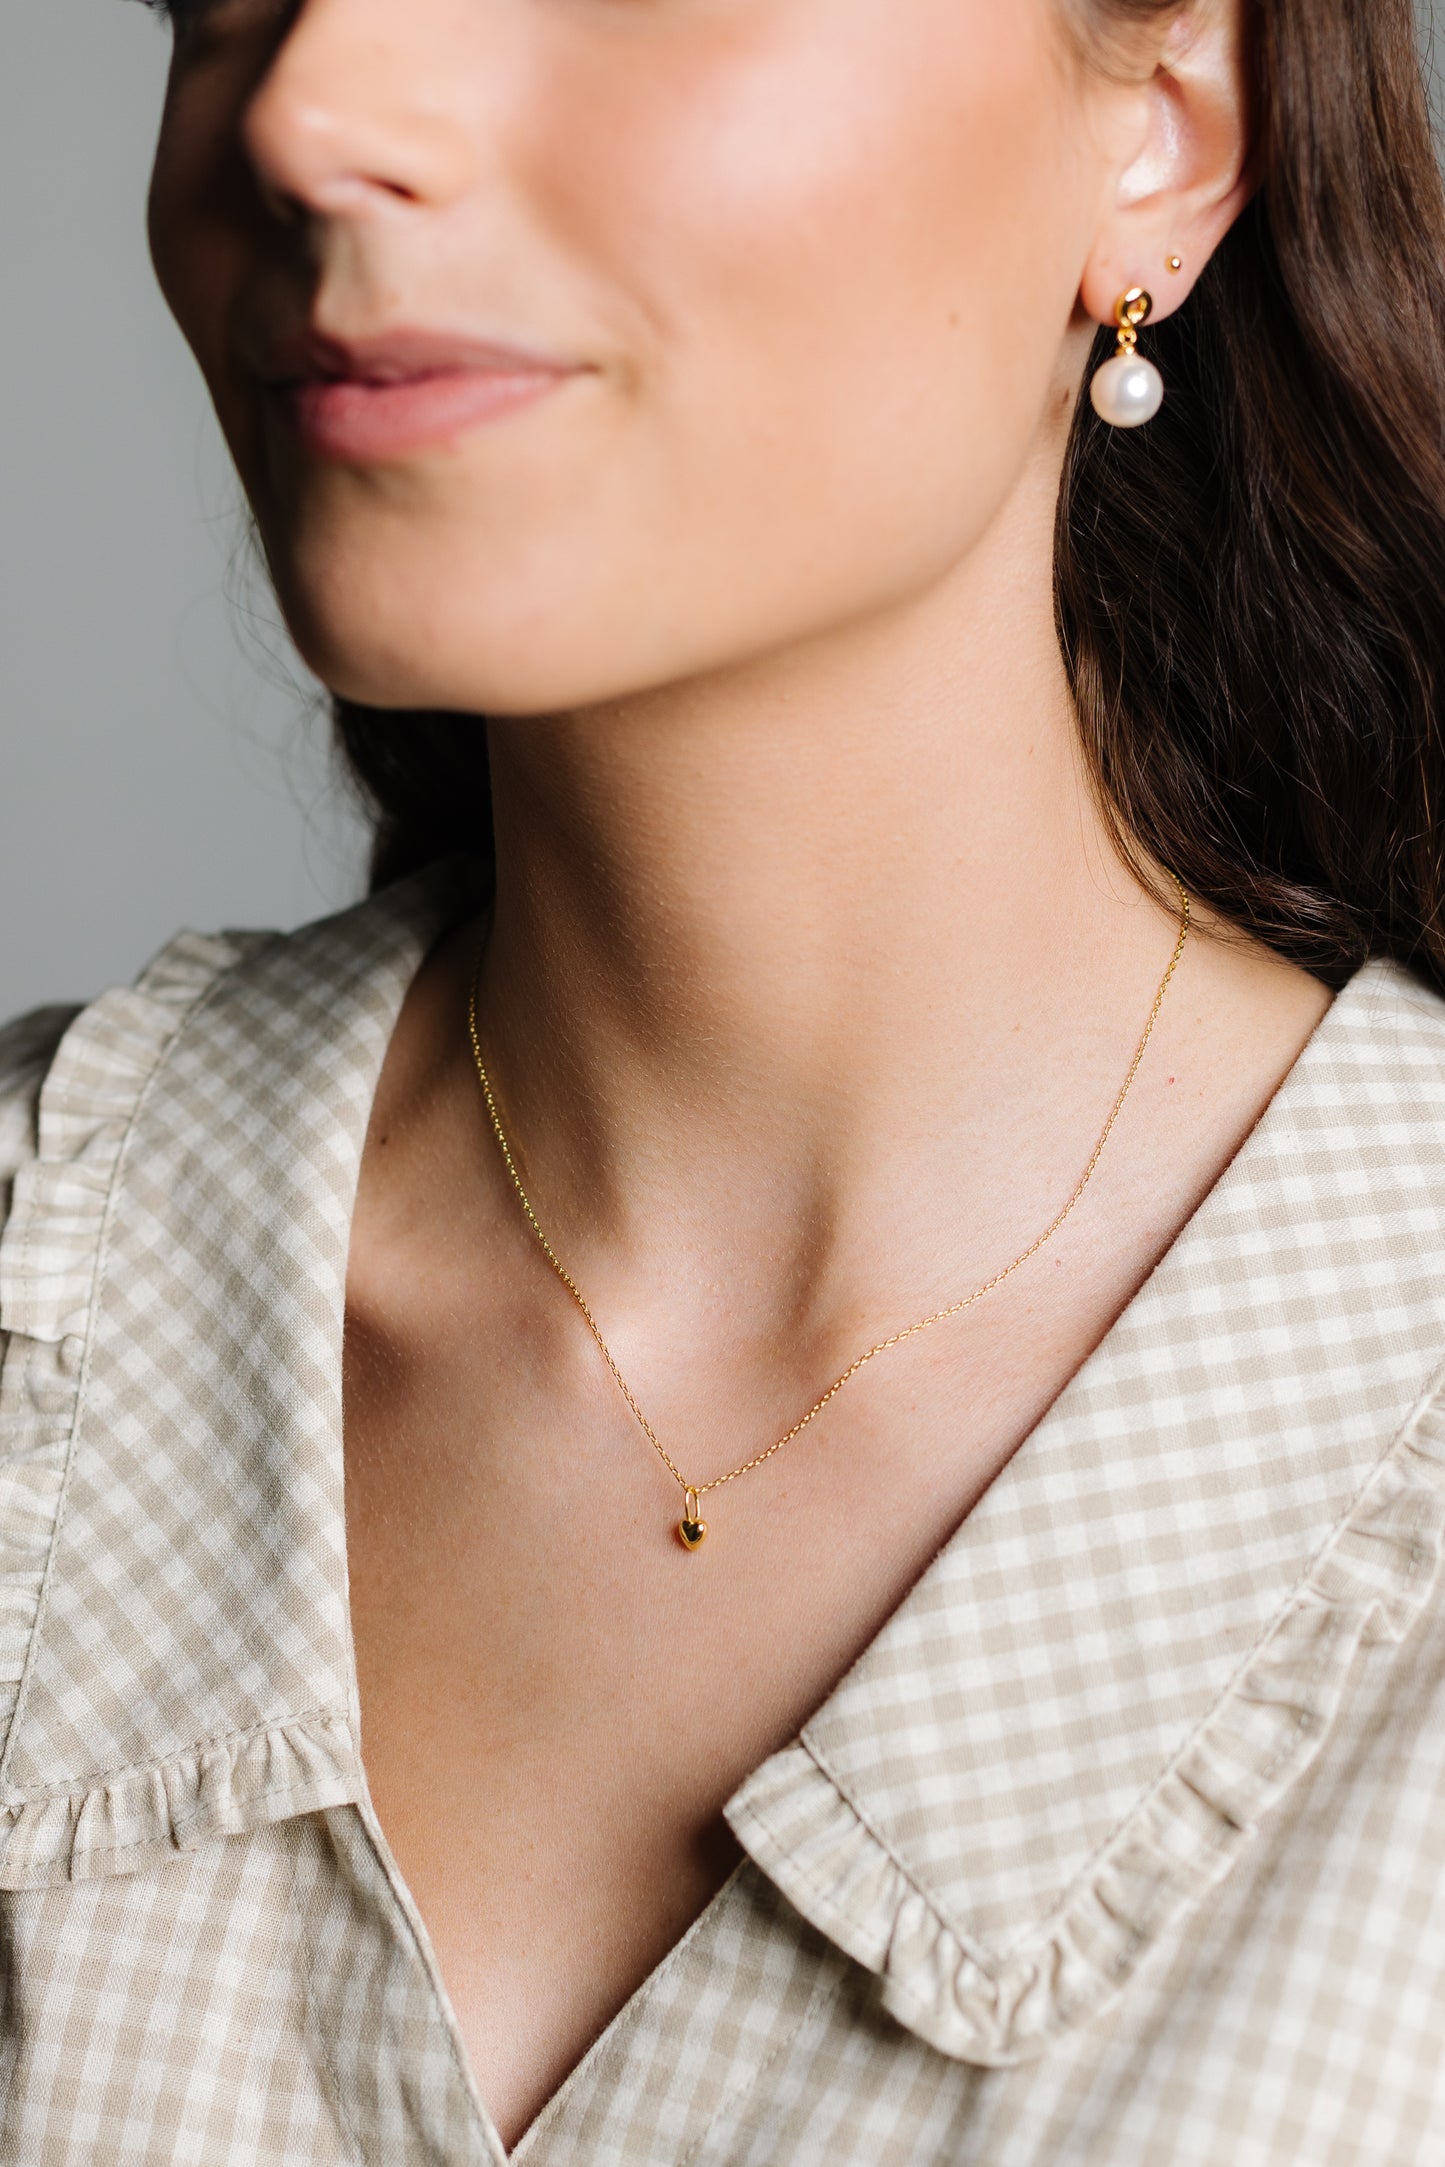 Cove Dainty Heart Necklace